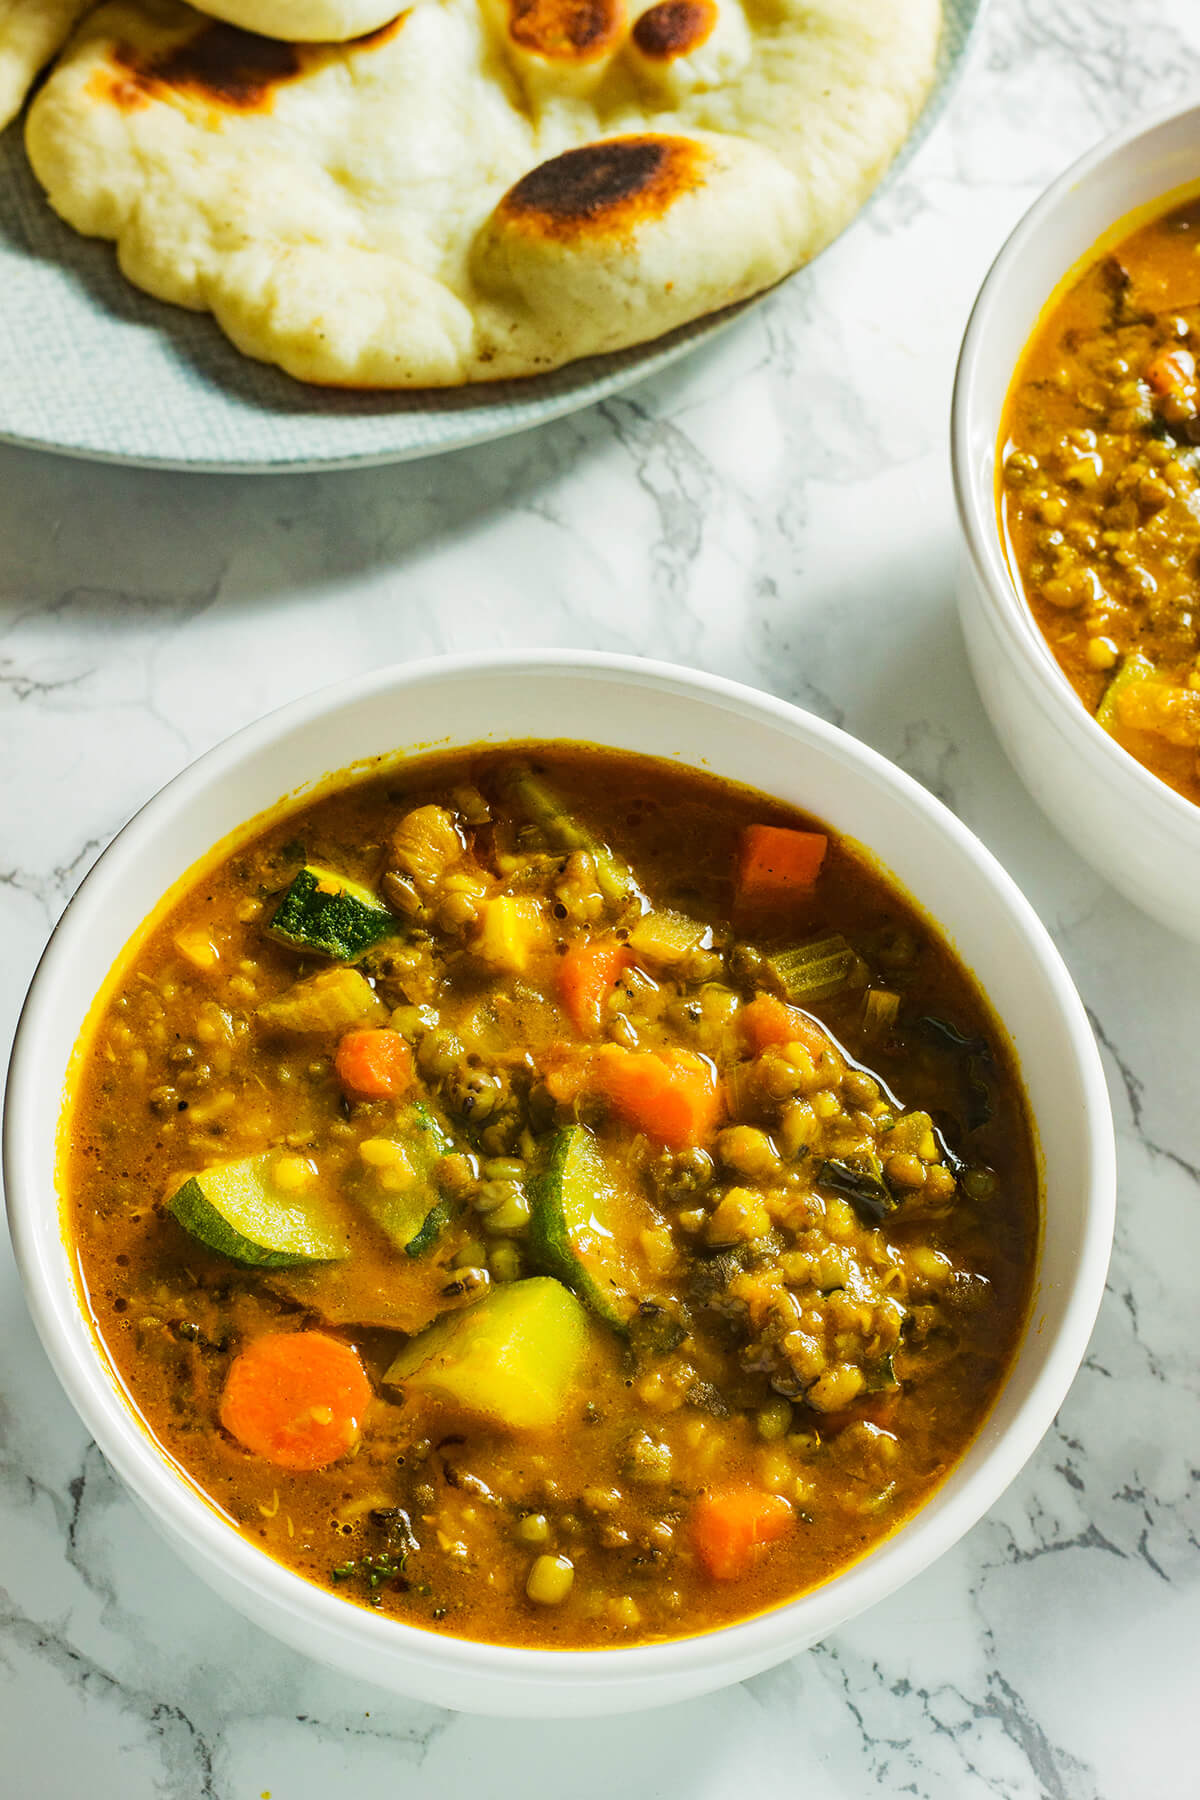 This mung bean soup hits every note for a perfect meal- it is warming and filling, creamy and chunky, spiced but not spicy. It just makes sense once you try it!